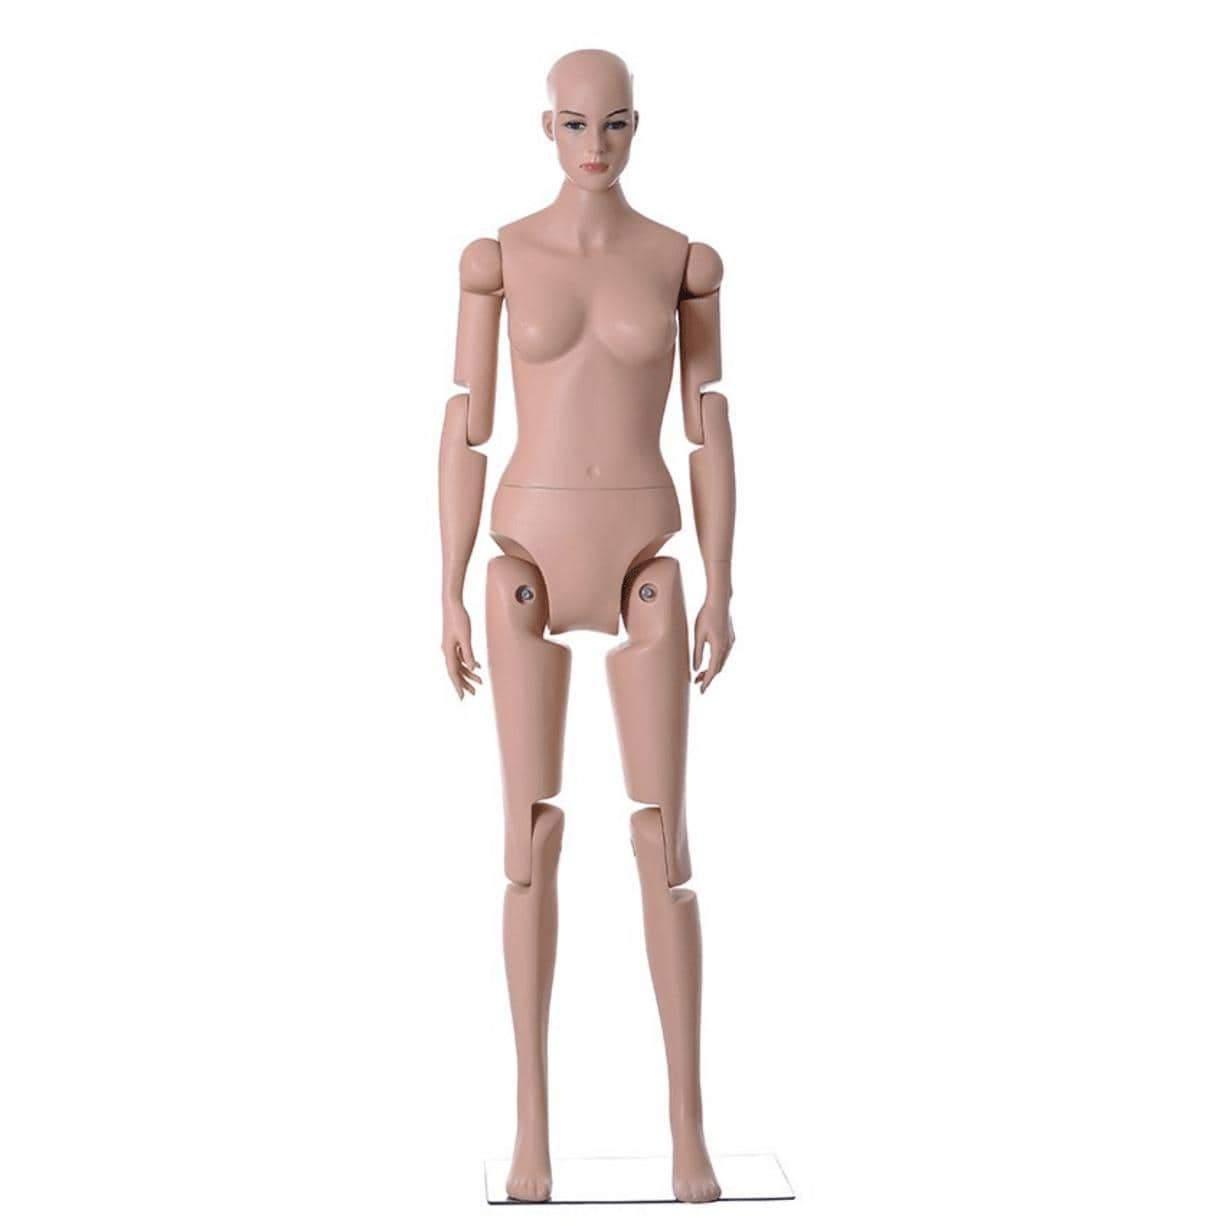 5' 11" Realistic Posable Female Mannequin MM-Z25 - Mannequin Mall